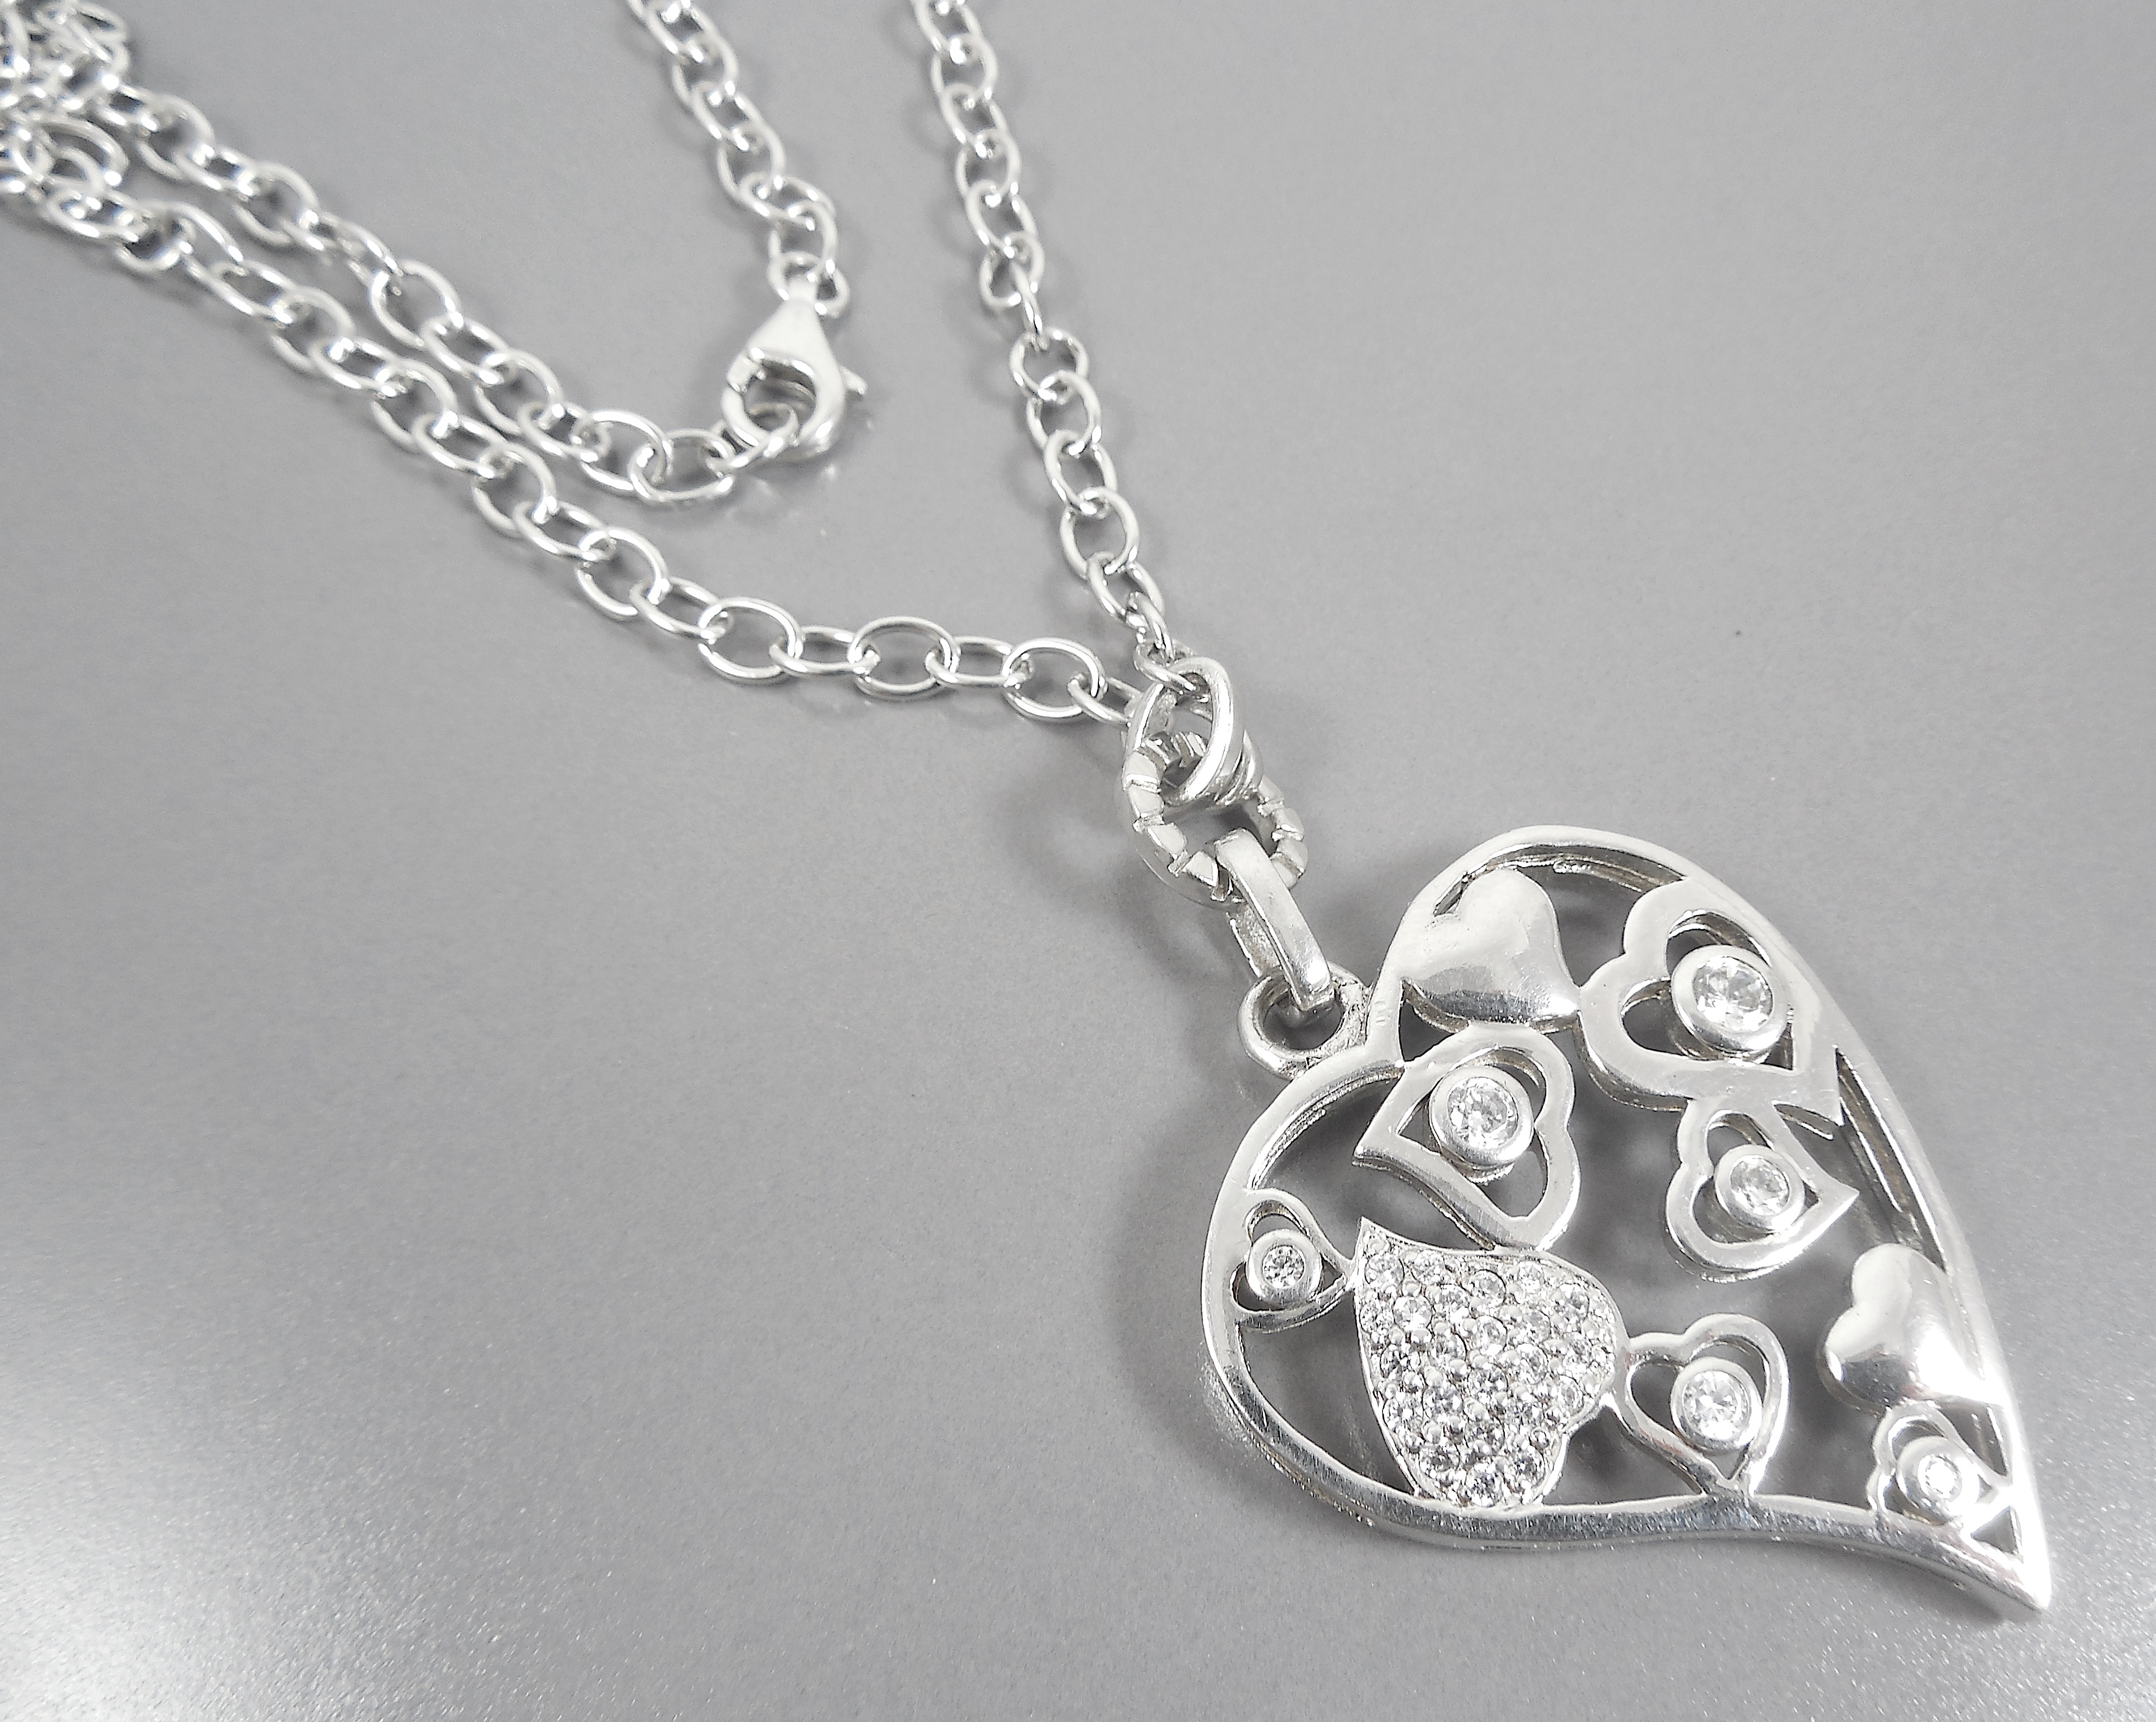 Heart shaped silver neklace - Image 2 of 4